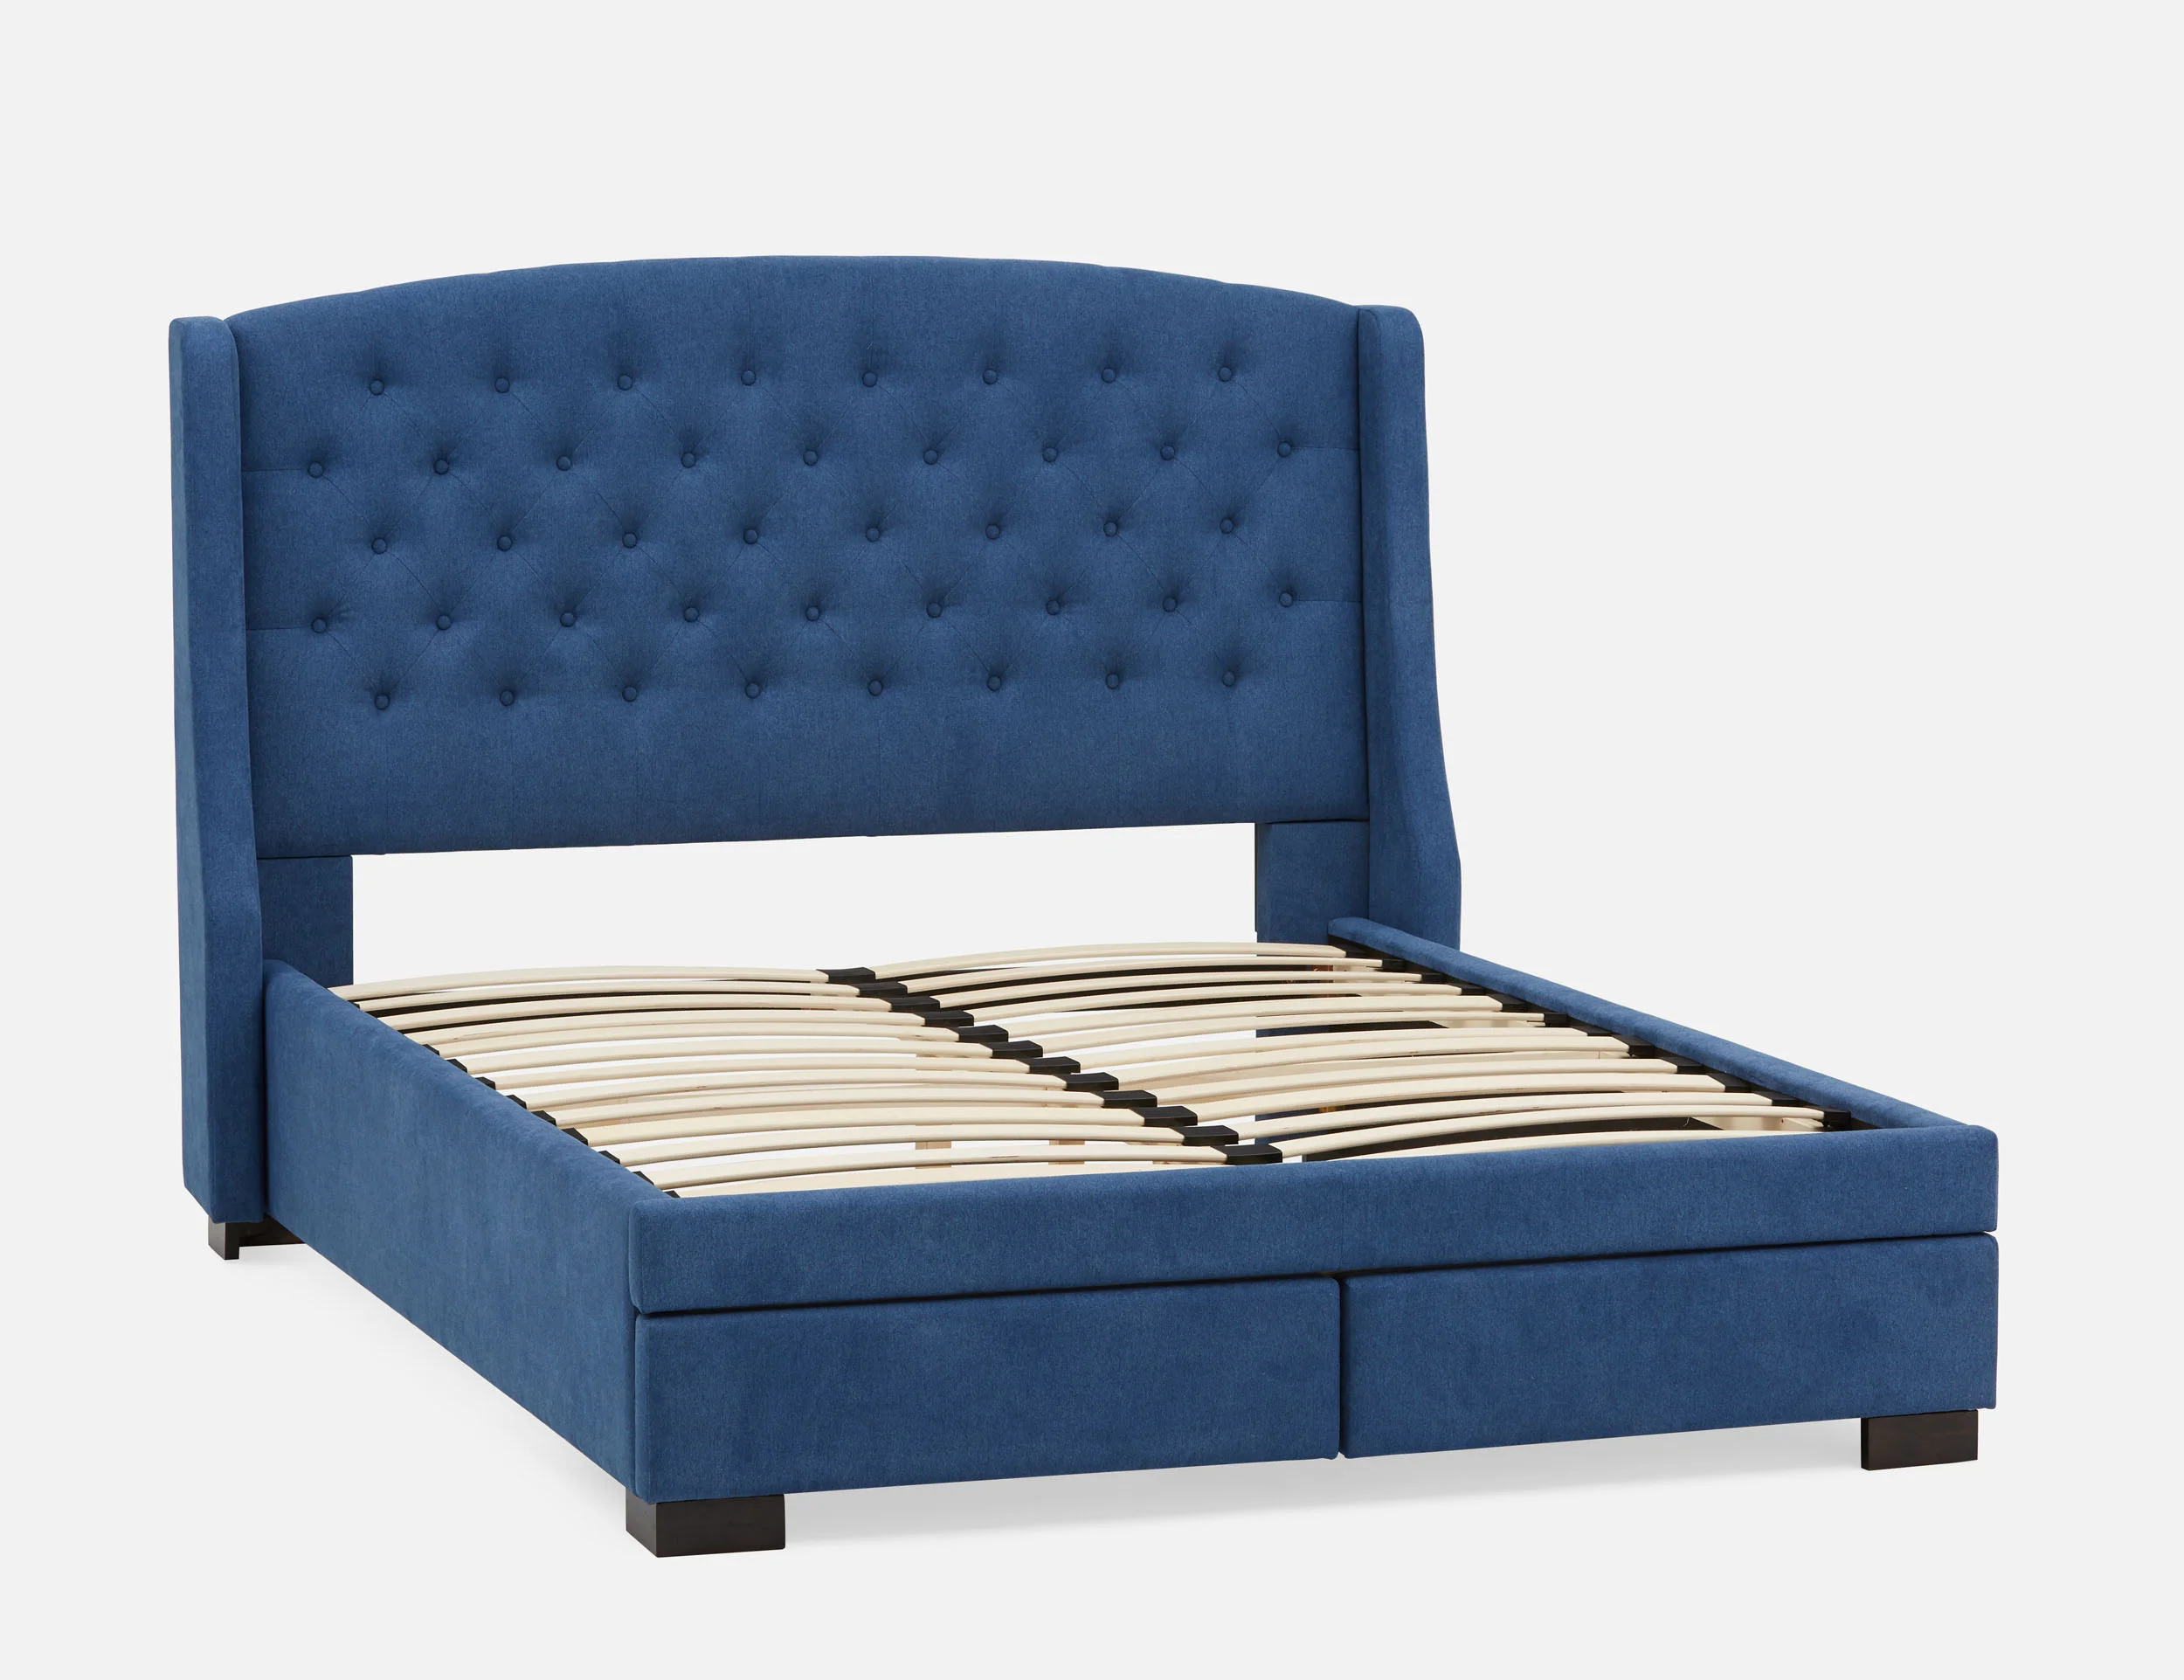 RAVEL tufted upholstered wingback queen size bed with storage | Structube